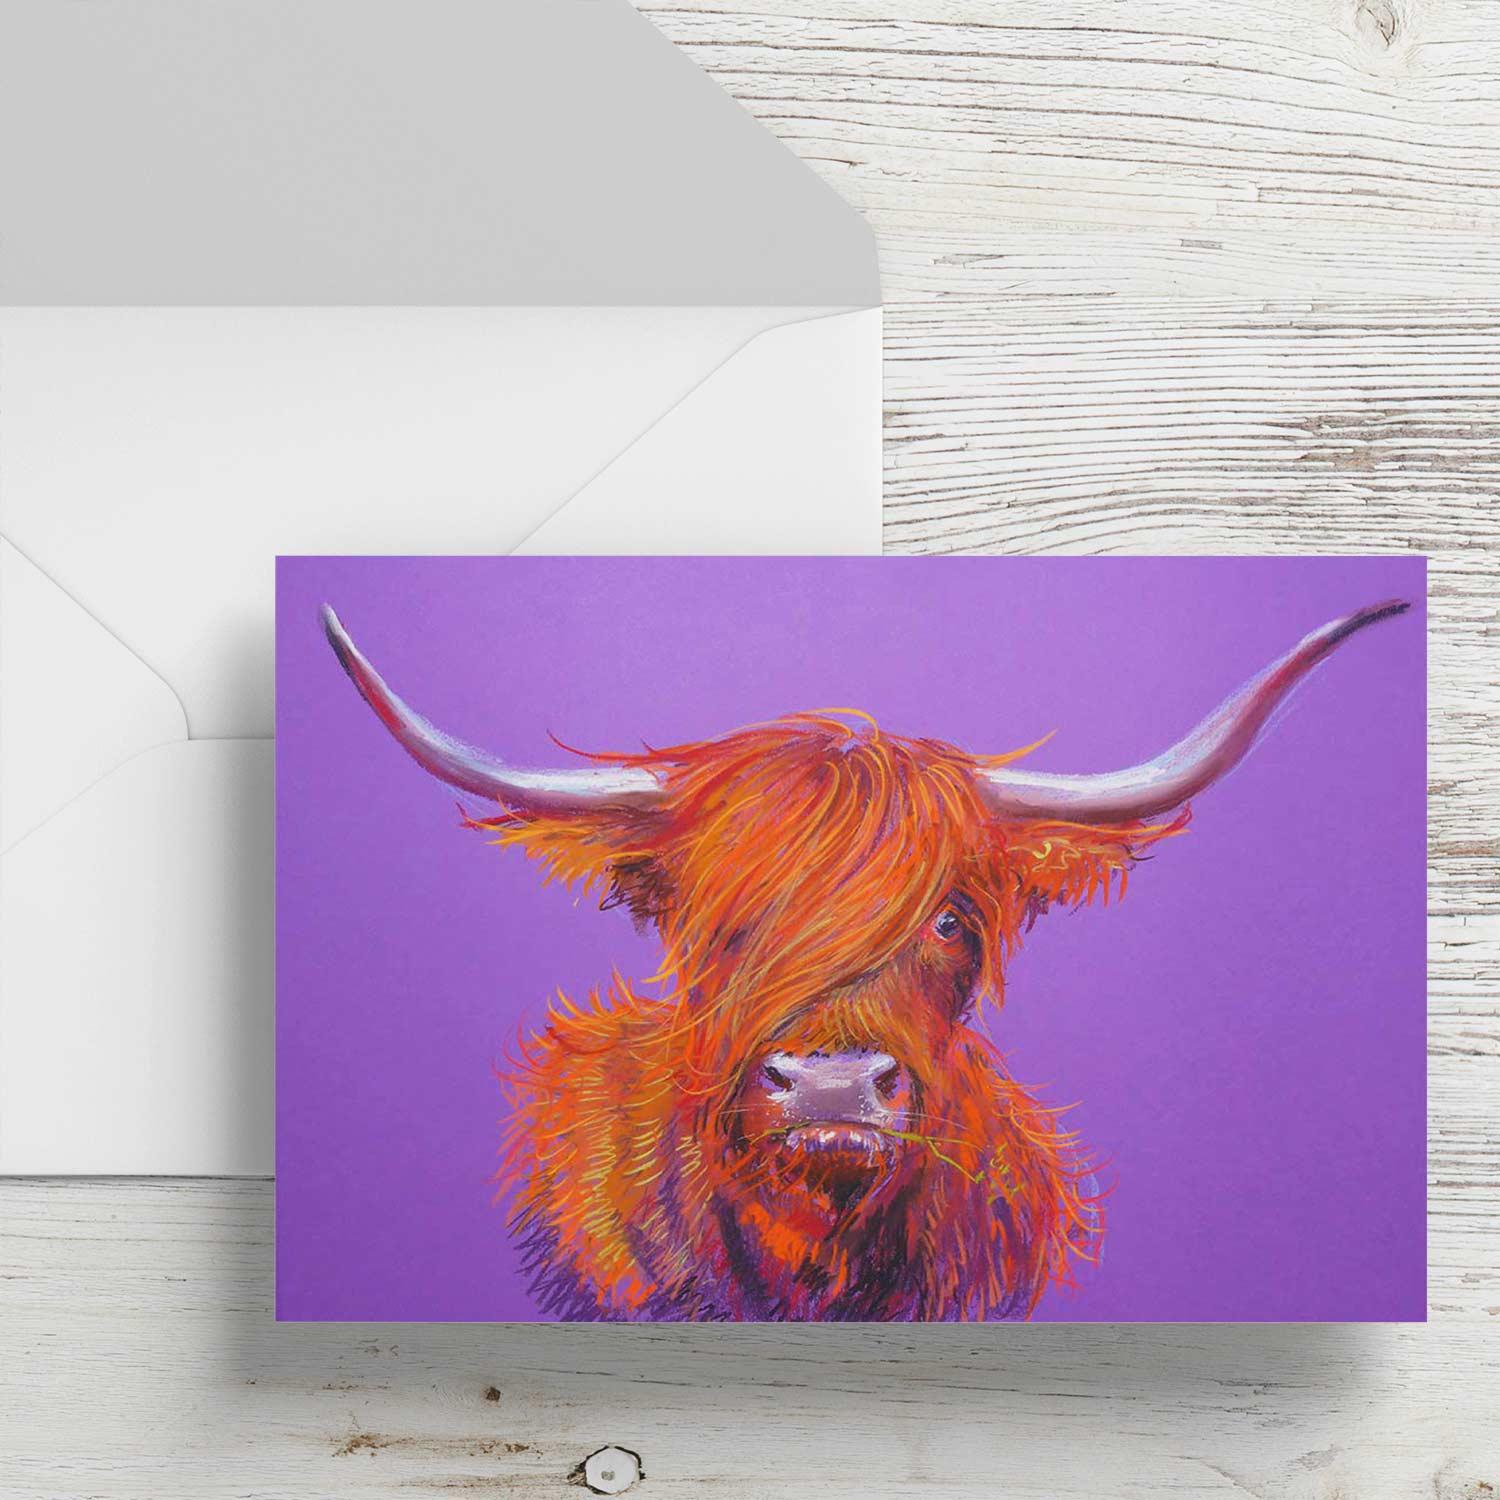 The Highlander Greeting Card from an original painting by artist Ann Vastano